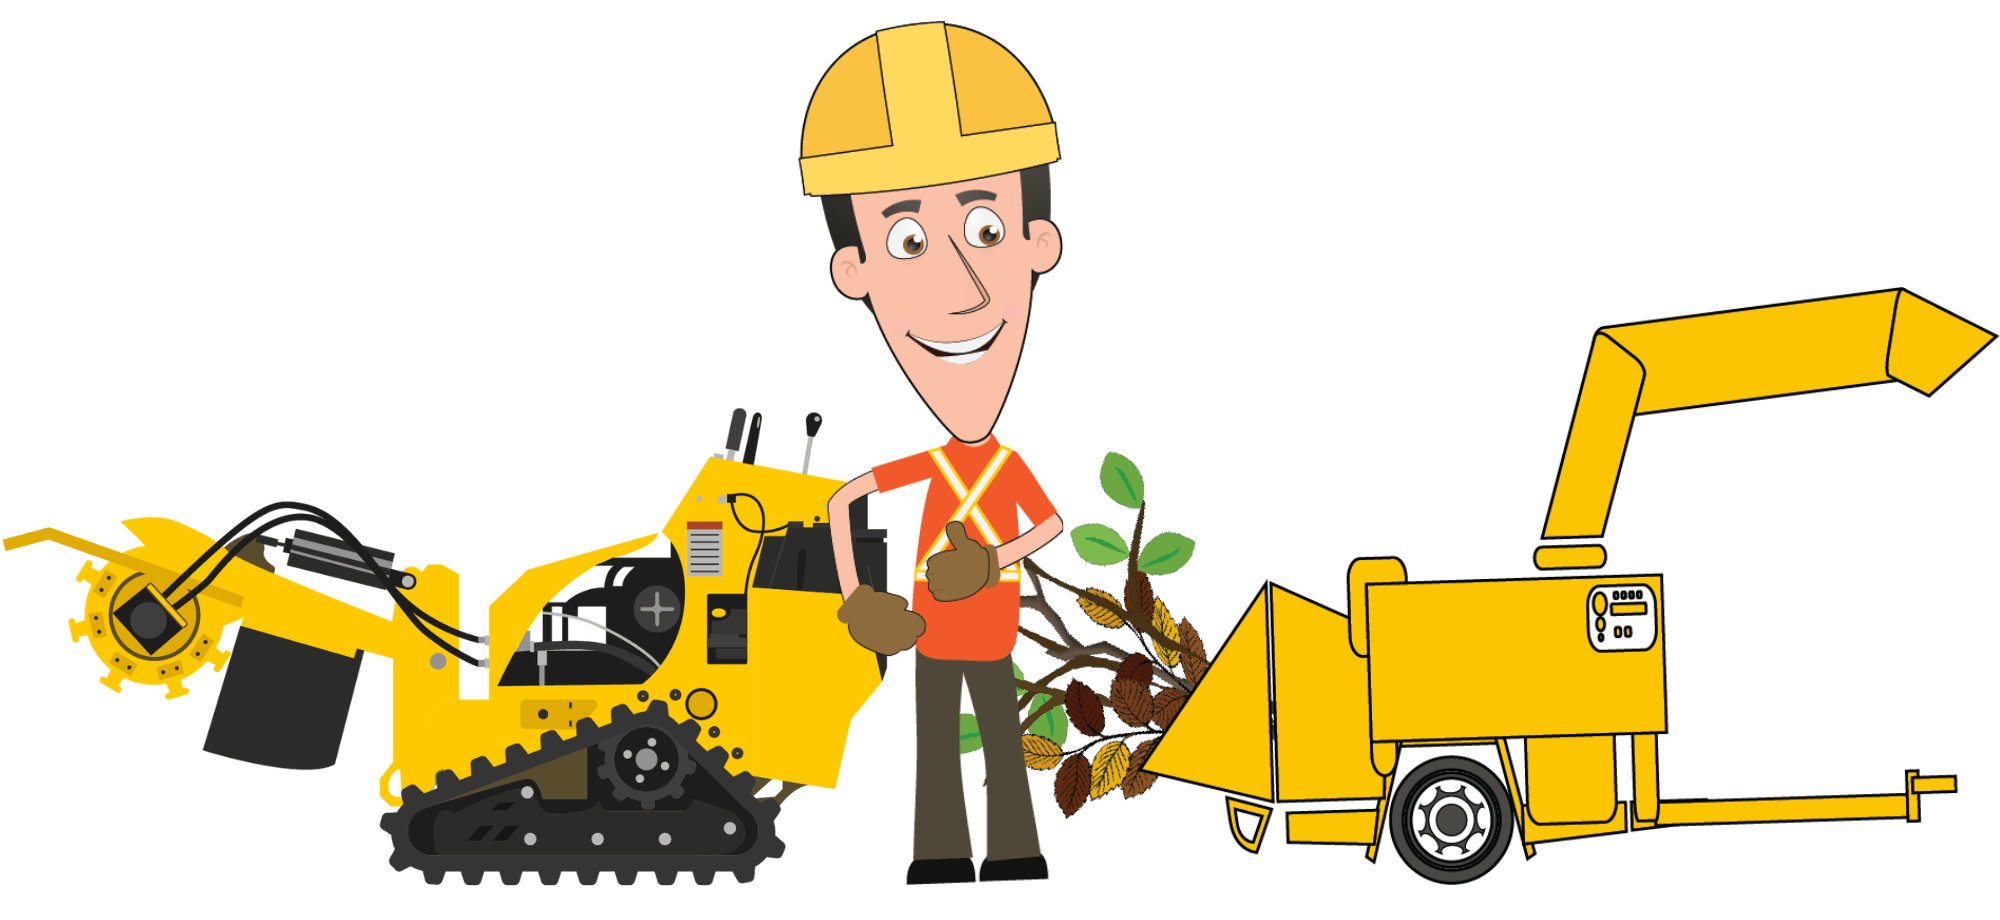 comic book character of chip it guy with a stump grinder and a brush chipper